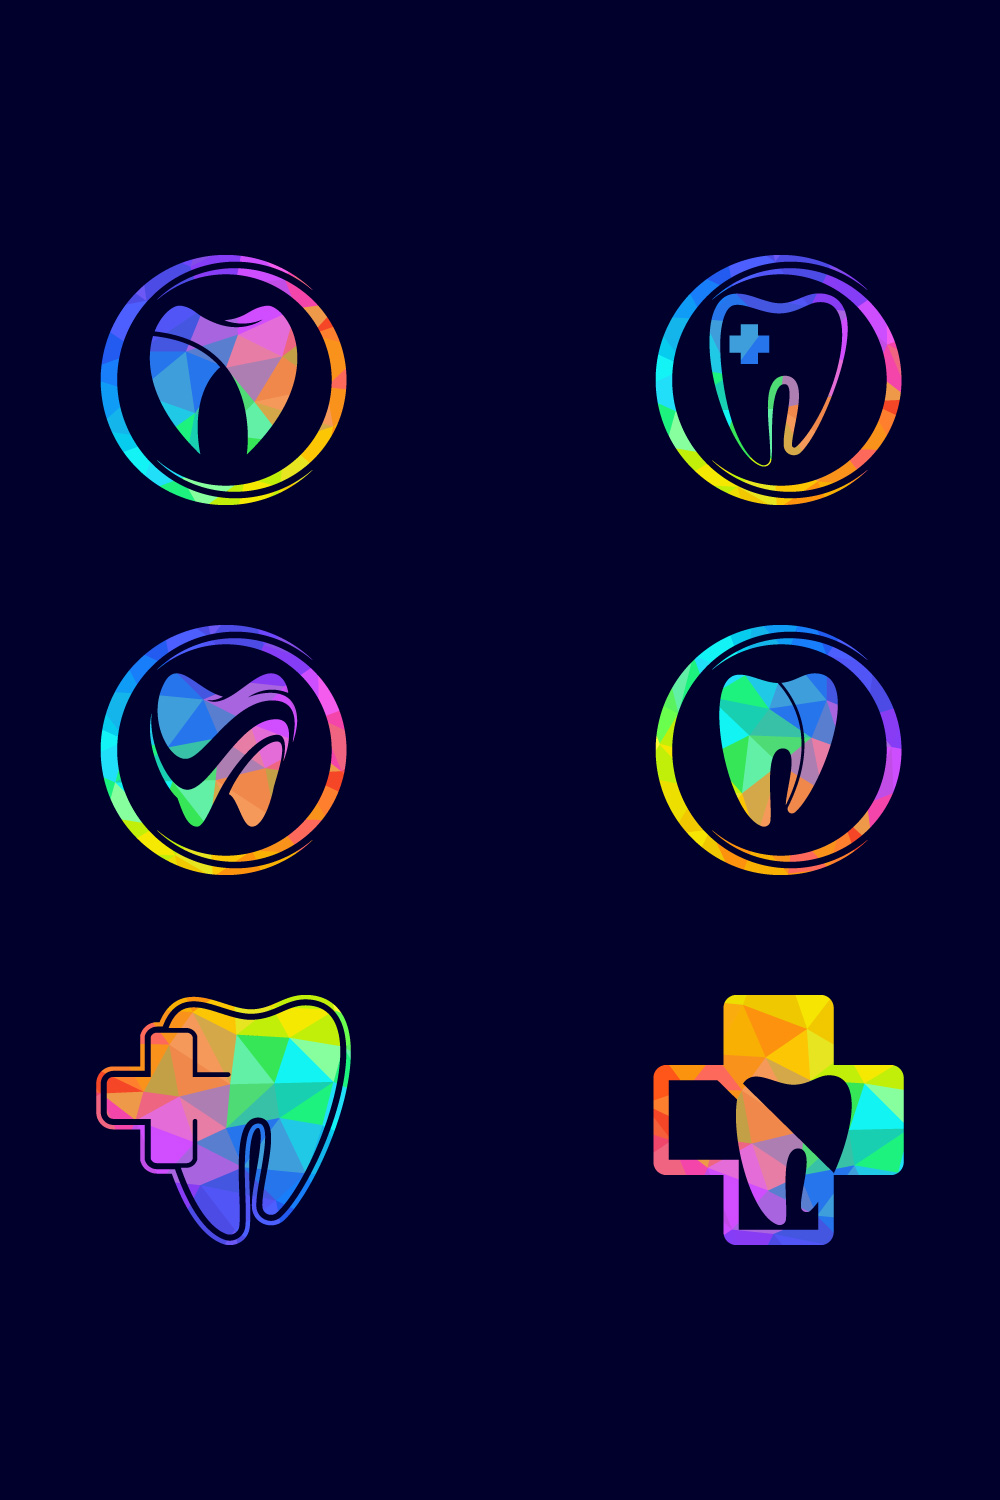 Polygonal tooth dental logo Low poly style dental clinic logo vector illustration pinterest preview image.